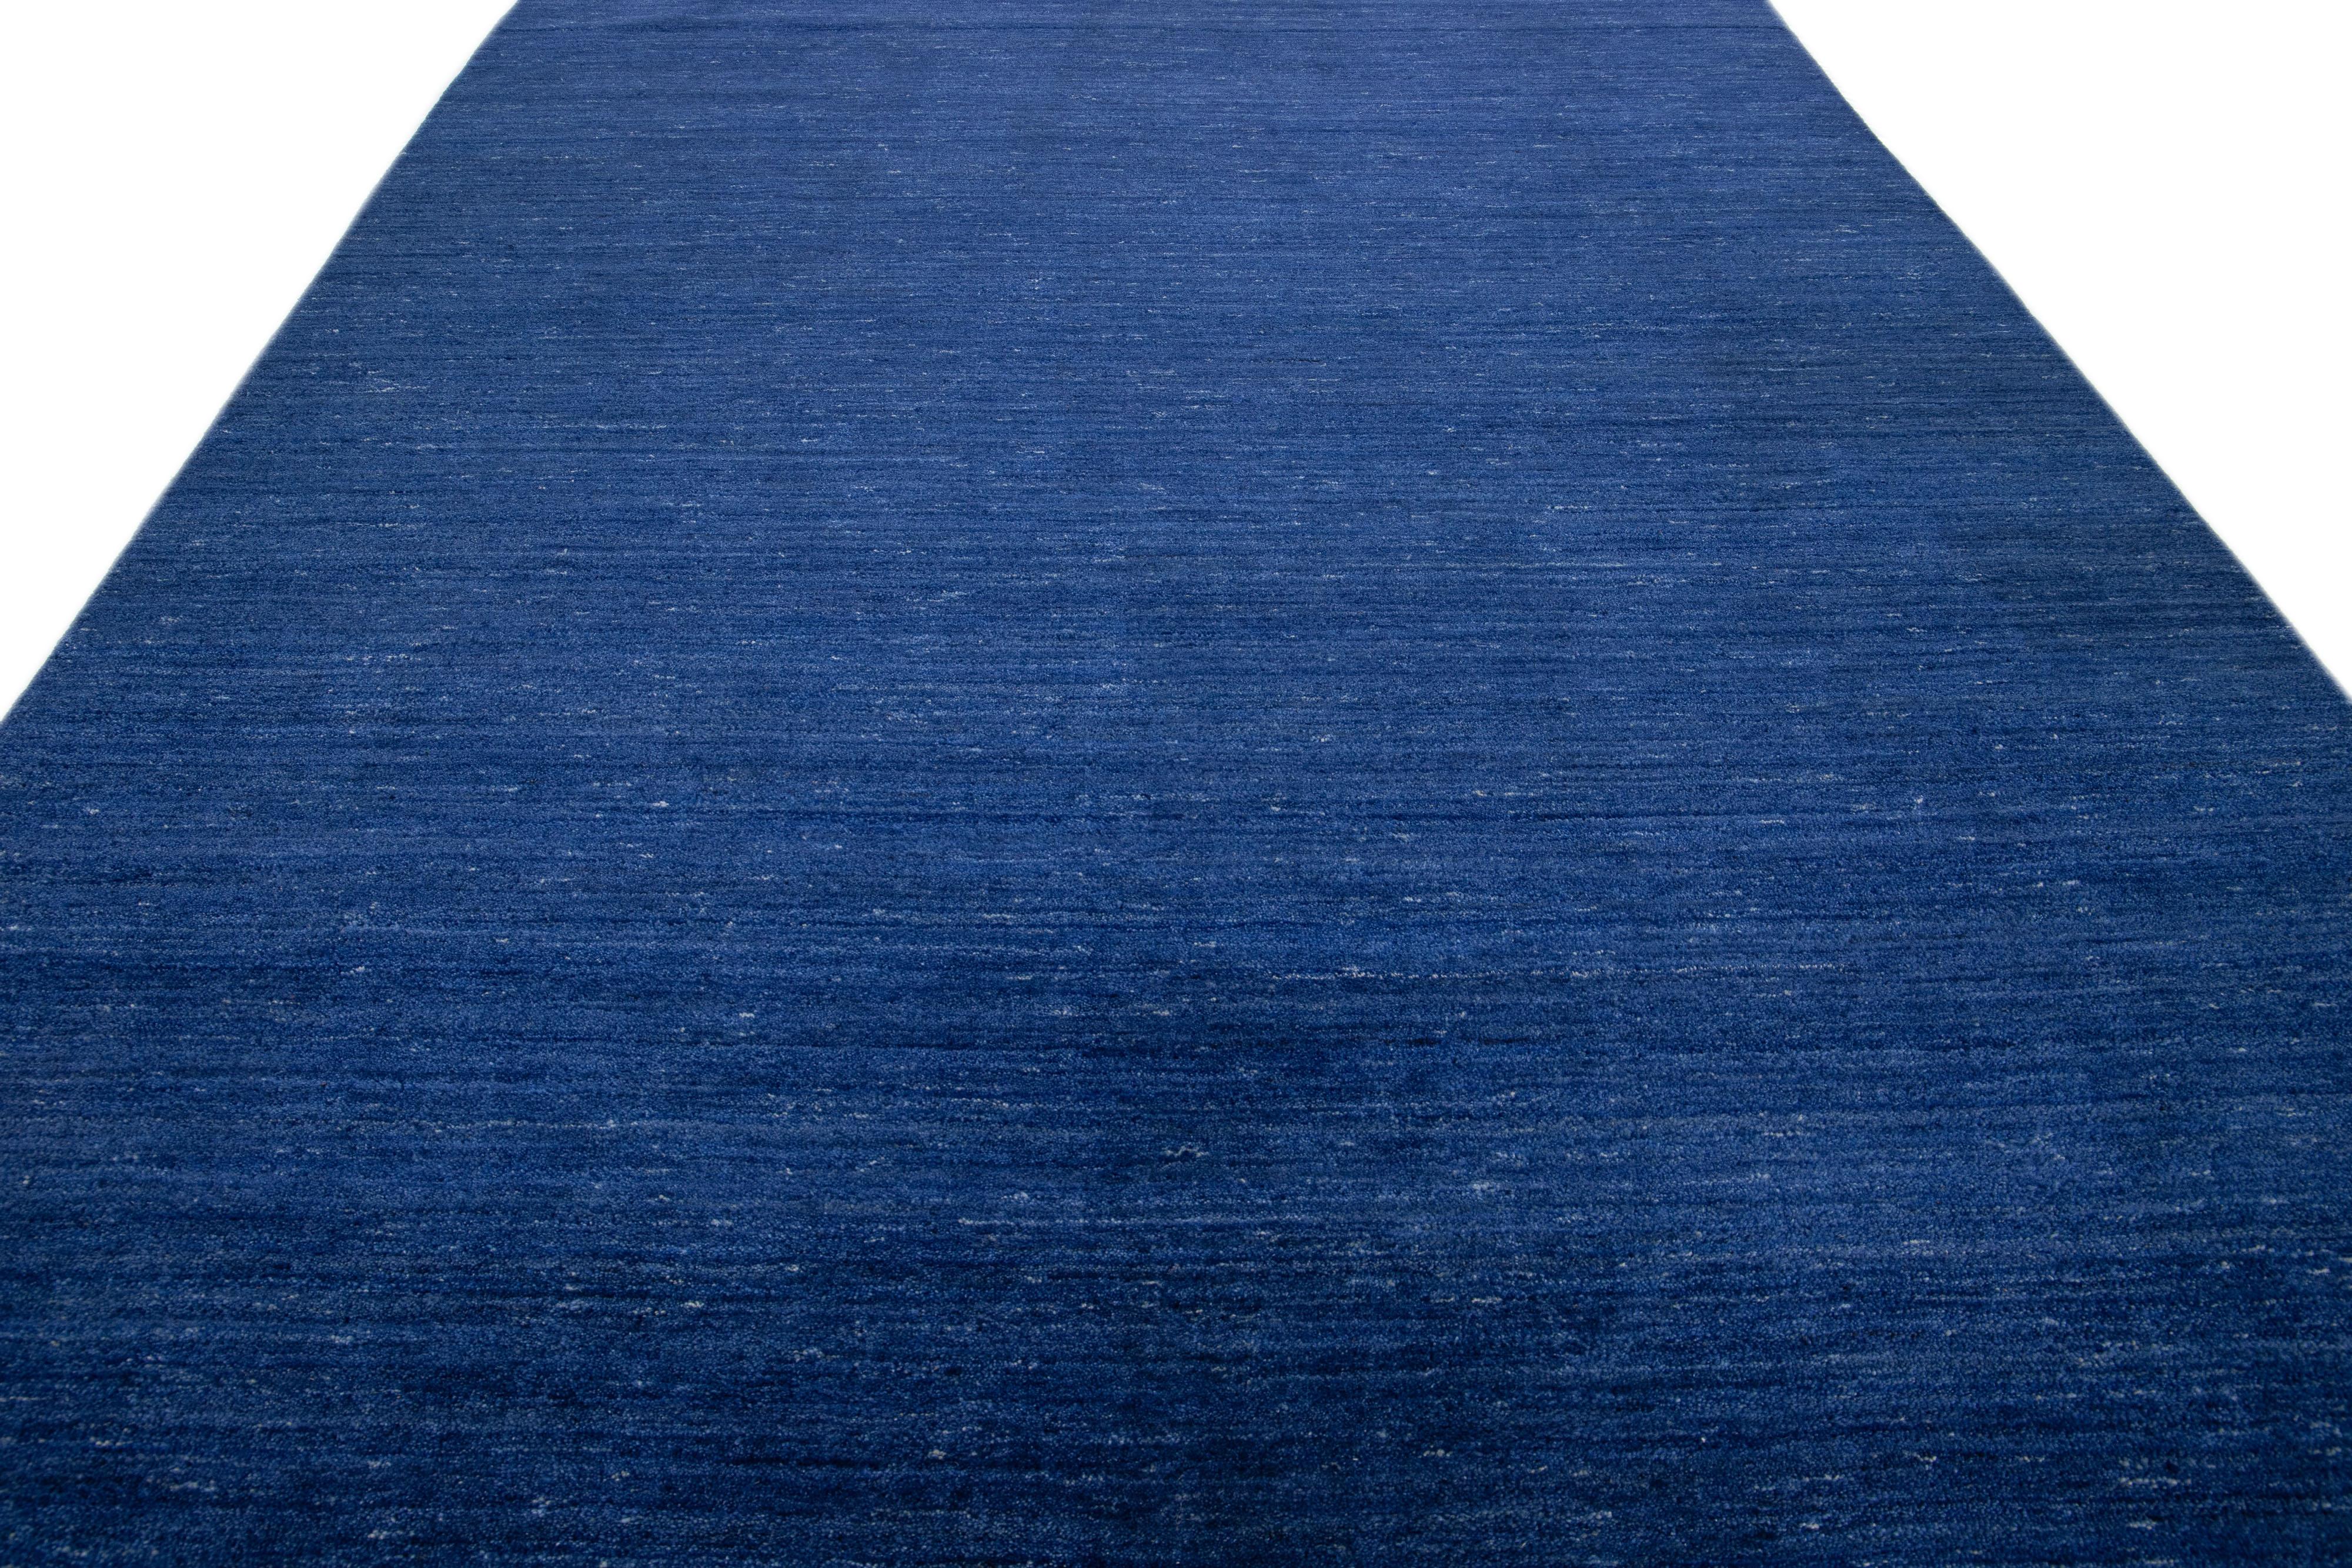 Minimalist Modern Gabbeh Style Handmade Wool Rug with Solid Blue Motif For Sale